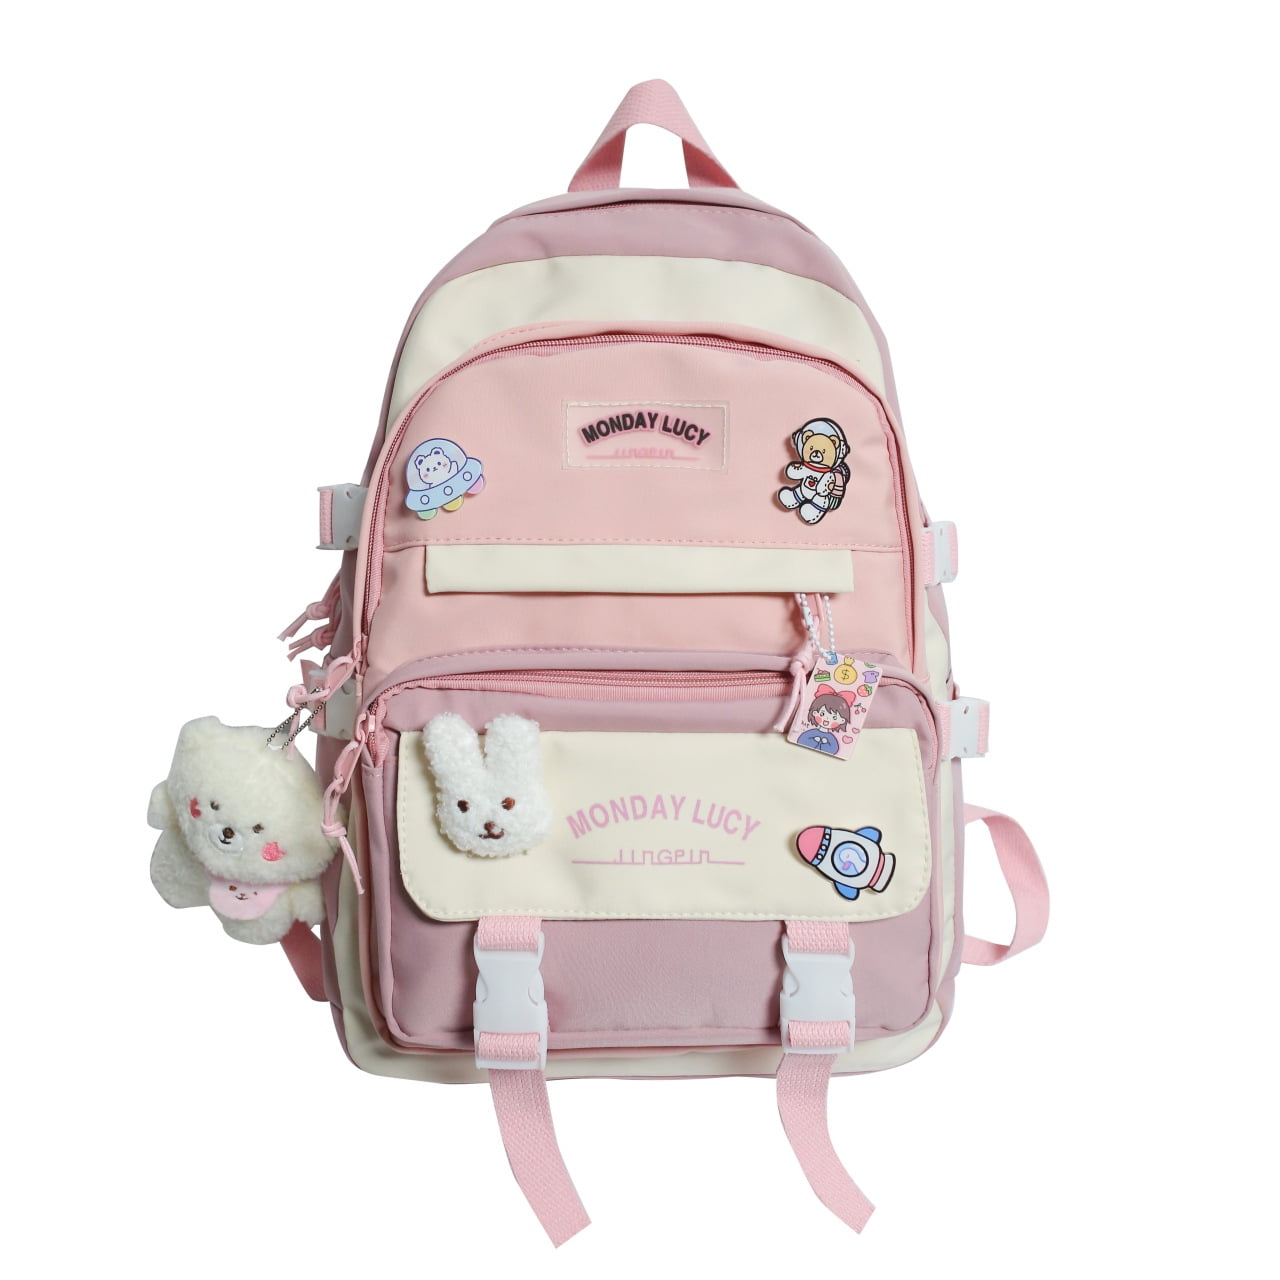 Girls' Backpack with Cute School Backpack, with Kawai Pin Accessories Chain  Girls' School Backpack Toddler Girls' Backpack(Green)